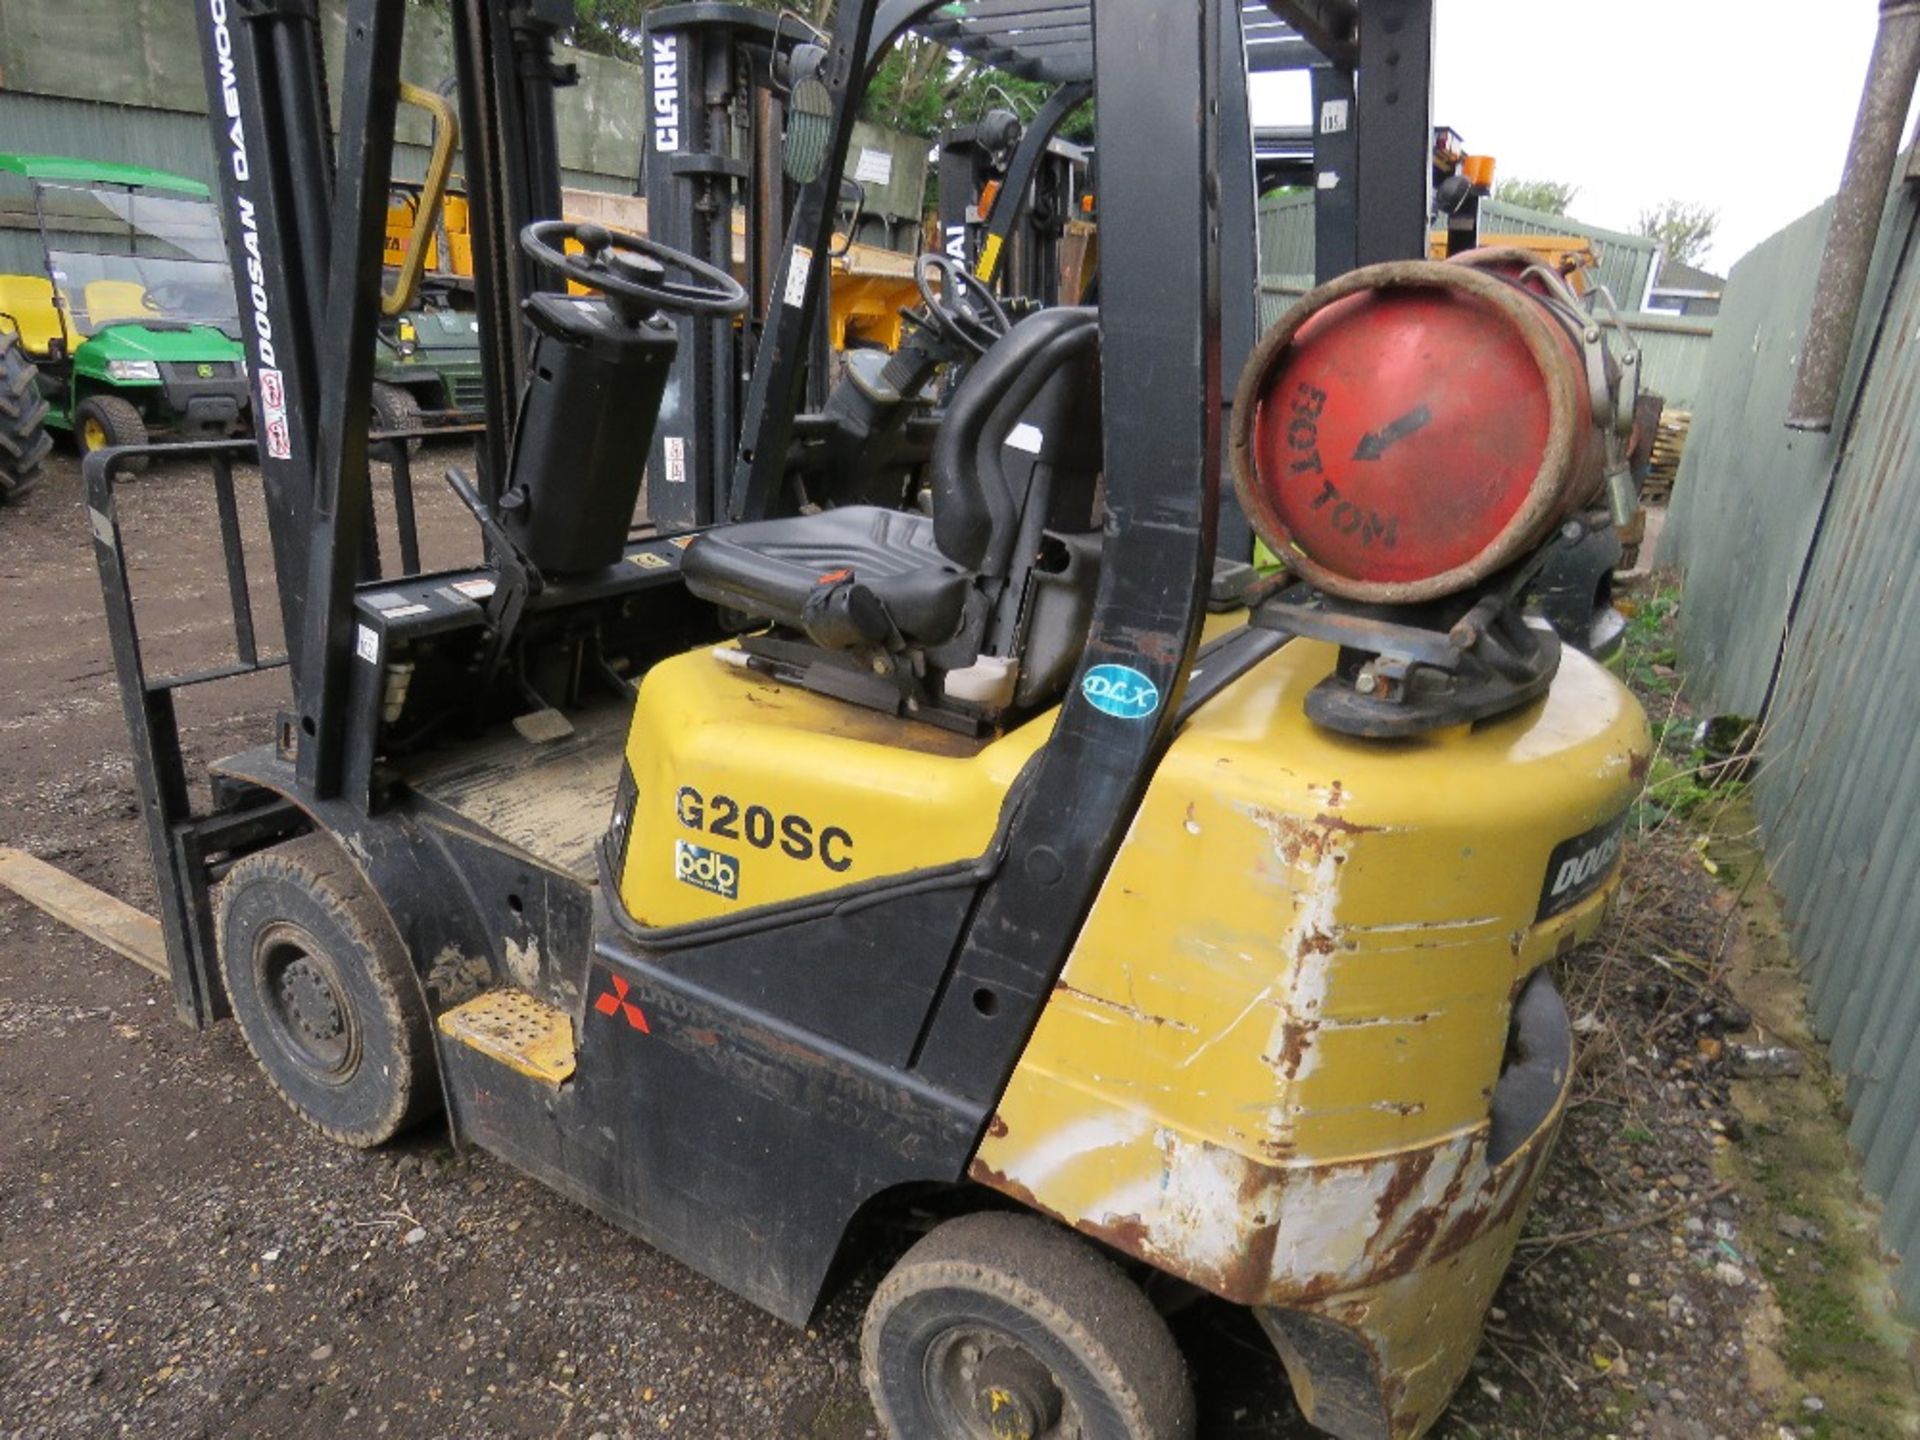 DOOSAN G20SC GAS FORKLIFT 2000KG RATED WITH SIDE SHIFT. YEAR 2005 BUILD. - Image 6 of 7